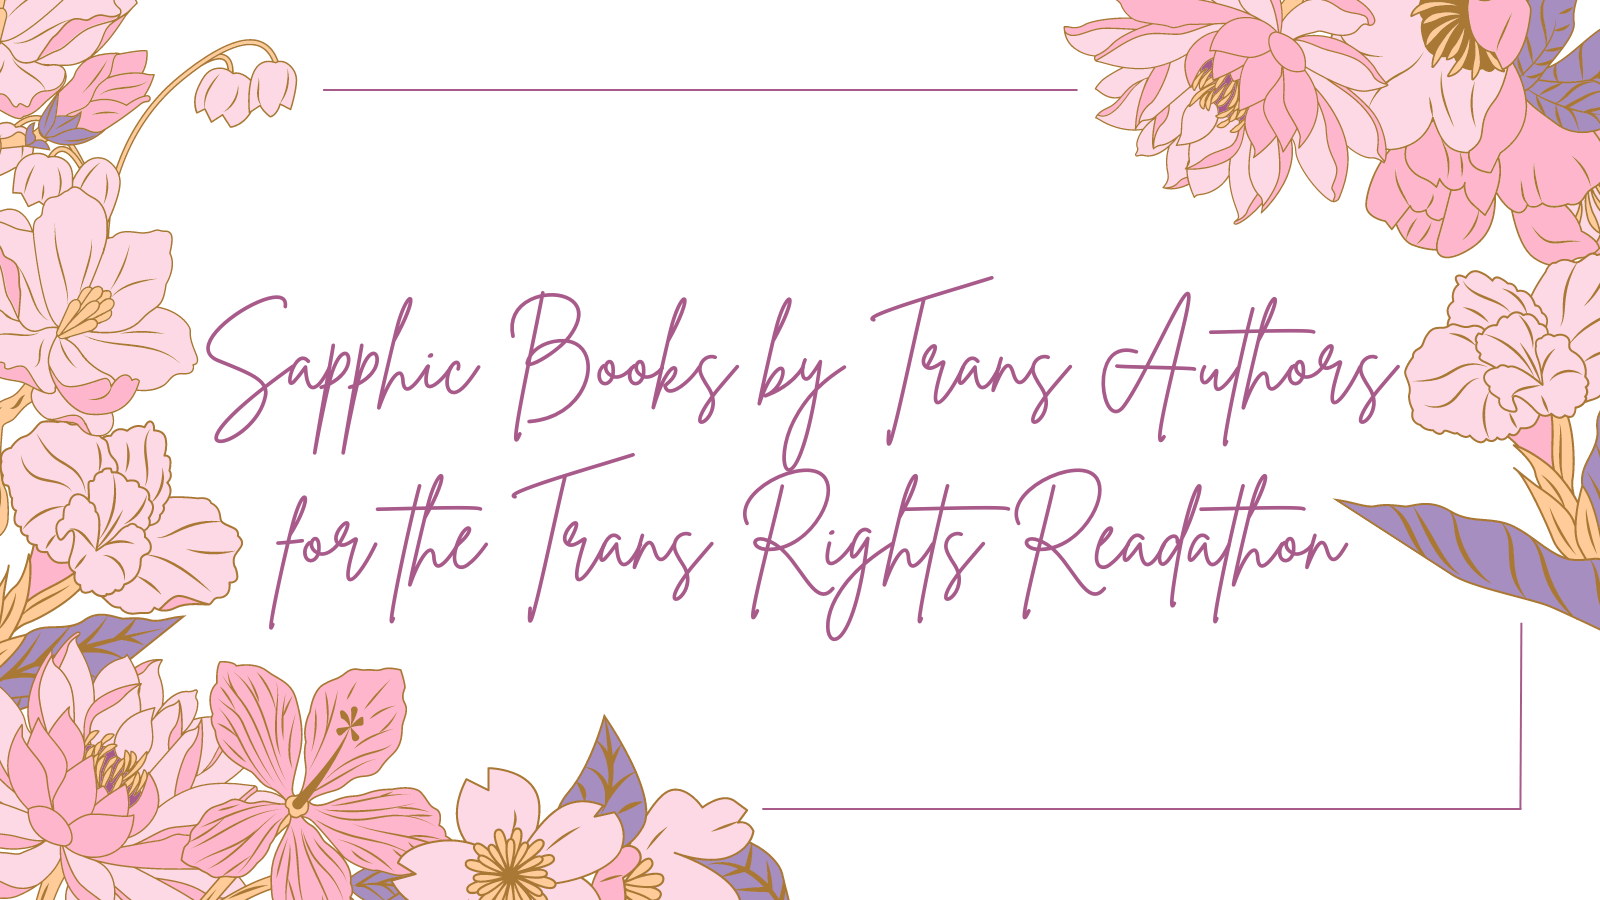 a graphic with the text Sapphic Books by Trans Authors for the Trans Rights Readathon with flowers around it